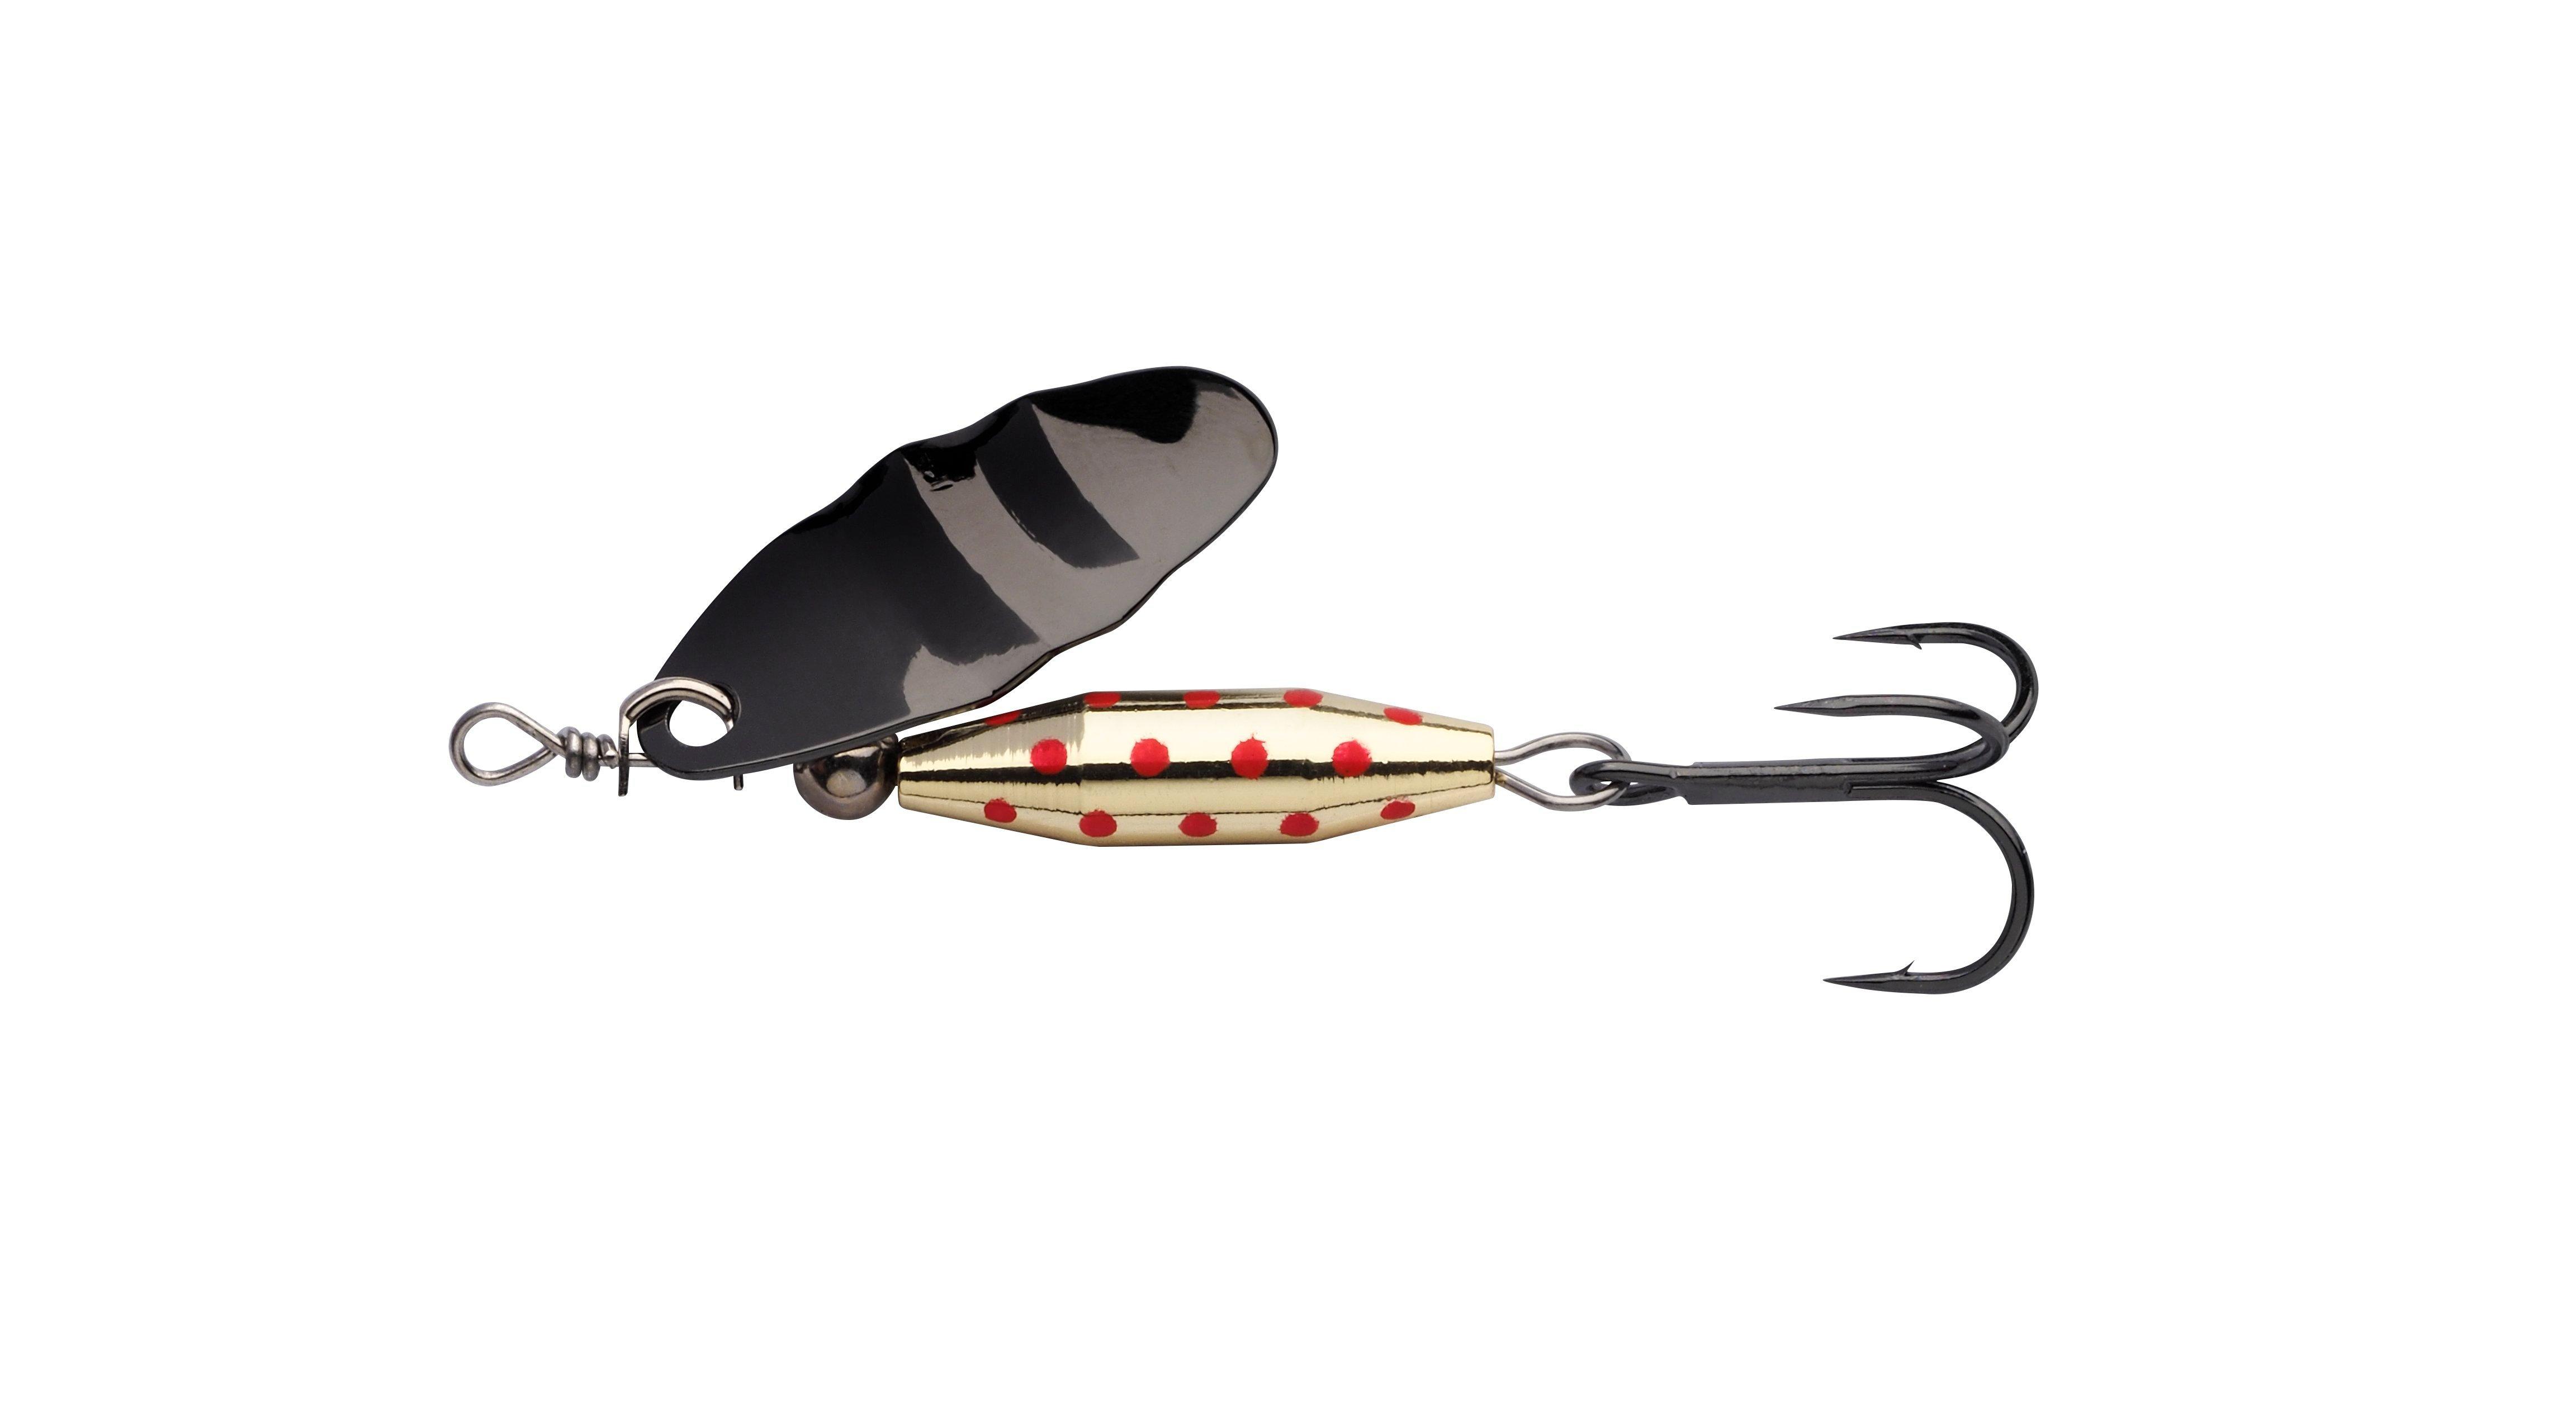 Abu Garcia Trout Spinner Lure Kit Set Pack of 4 Spoons Perch Pike Fish –  hobbyhomeuk